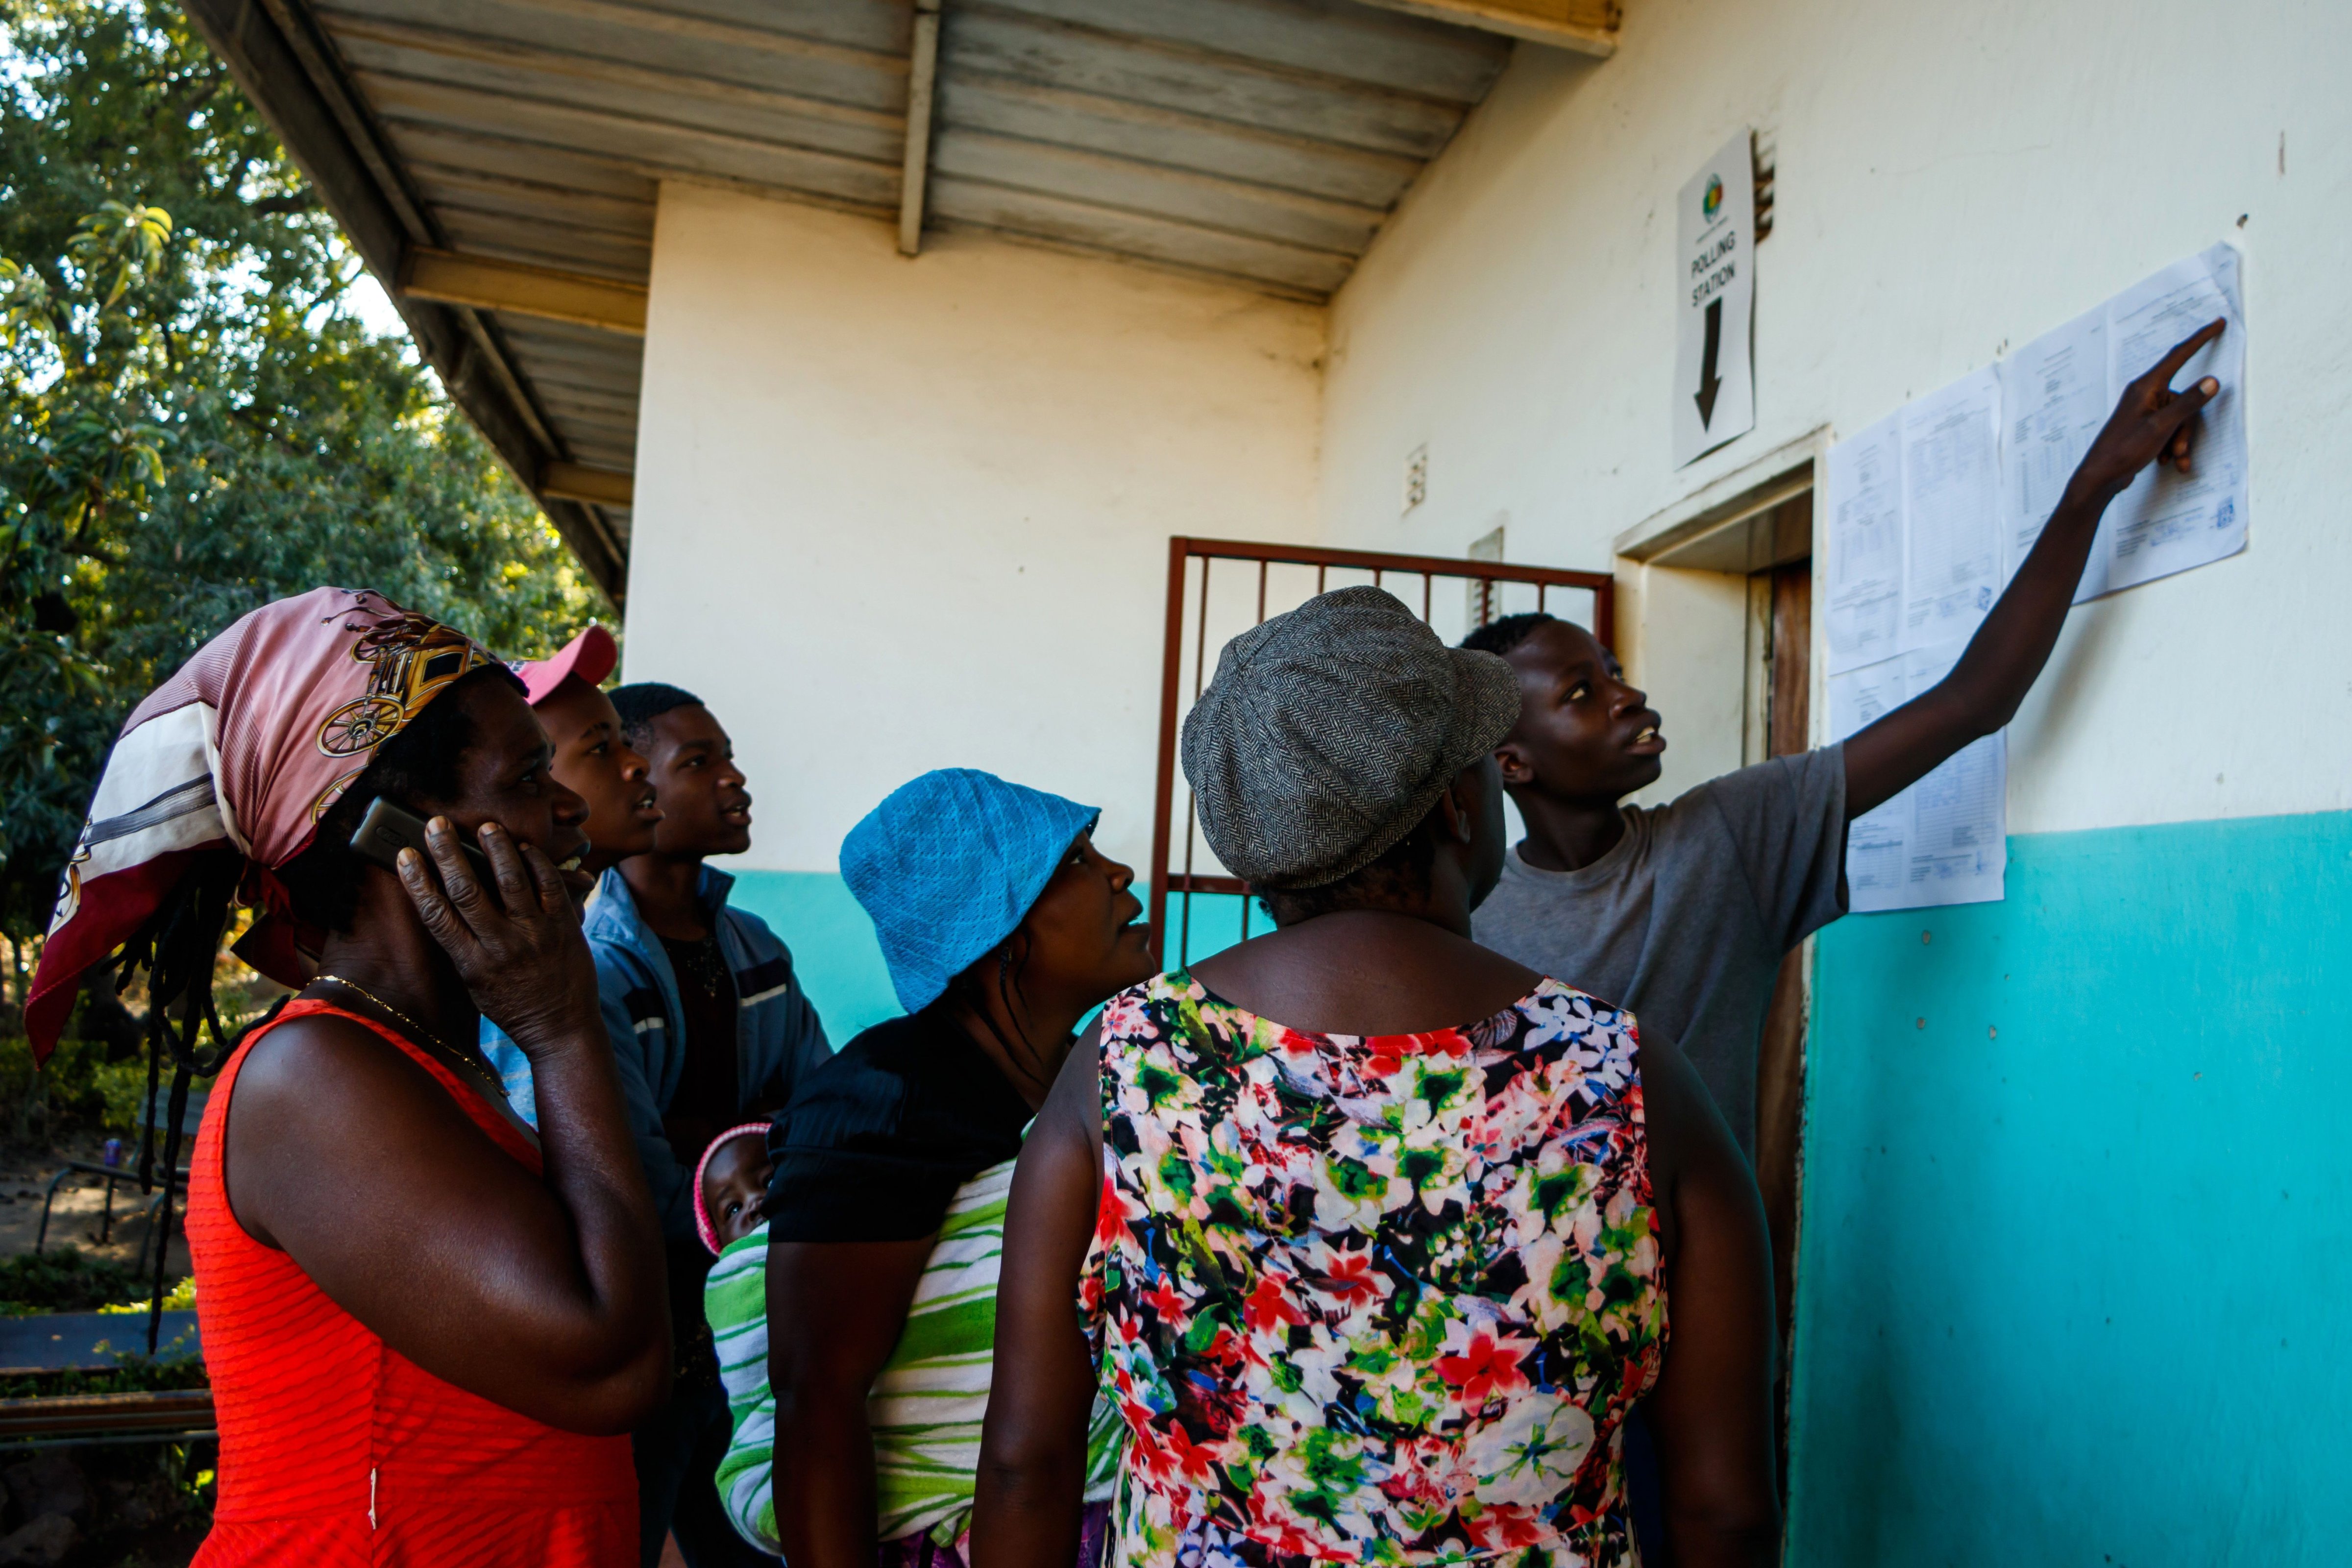 People gather a day after elections to look at results posted outside a polling station in Harare, Zimbabwe on July 31 2018. (Jekesai Nijikizana—AFP/Getty Images)